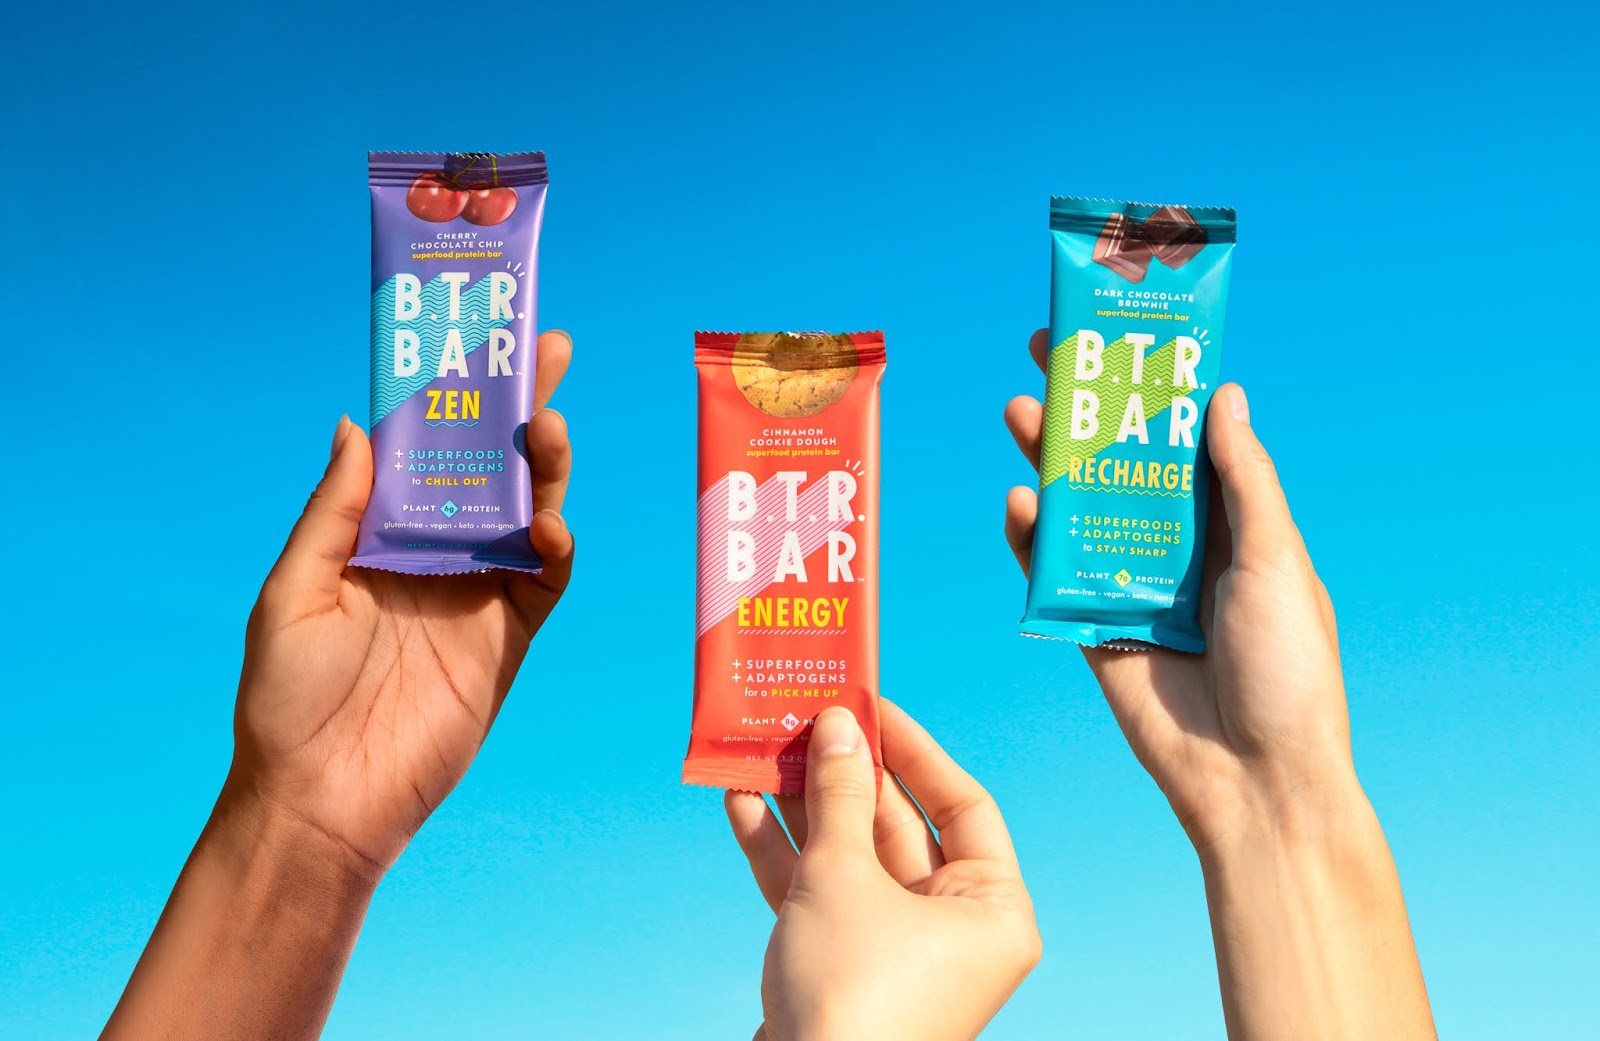 B.T.R. Bar – Packaging Of The World